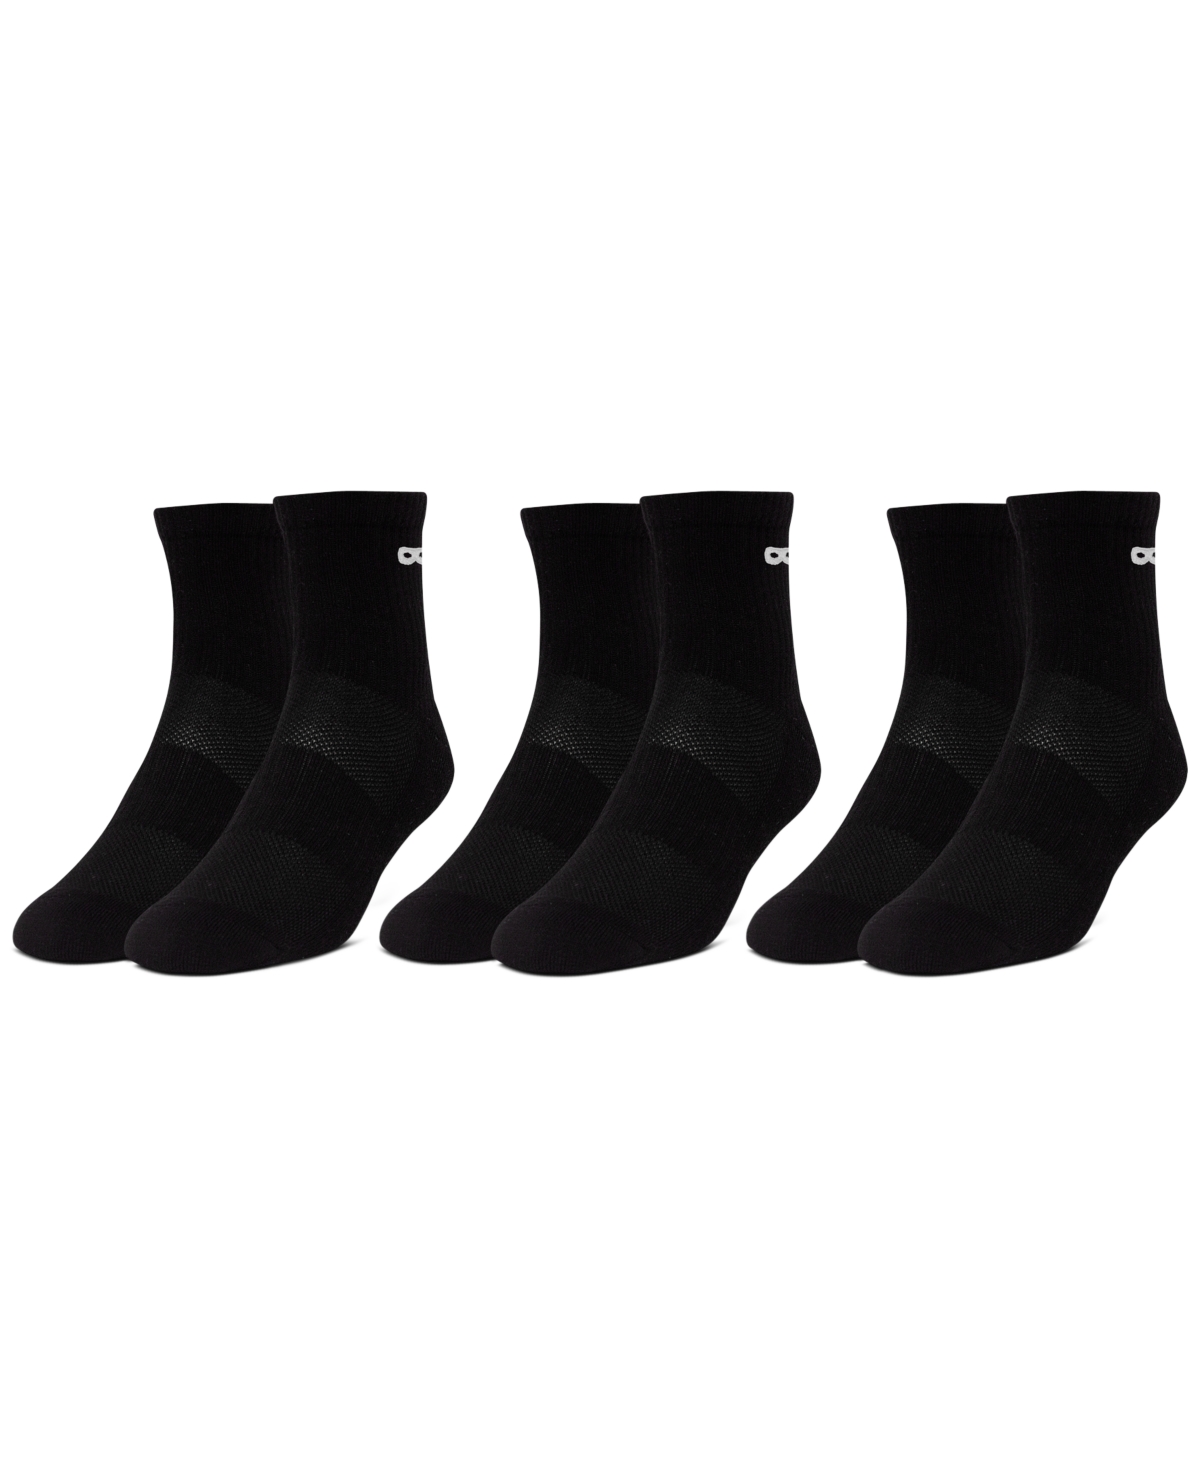 Shop Pair Of Thieves Men's Cushion Cotton Ankle Socks 3 Pack In Black